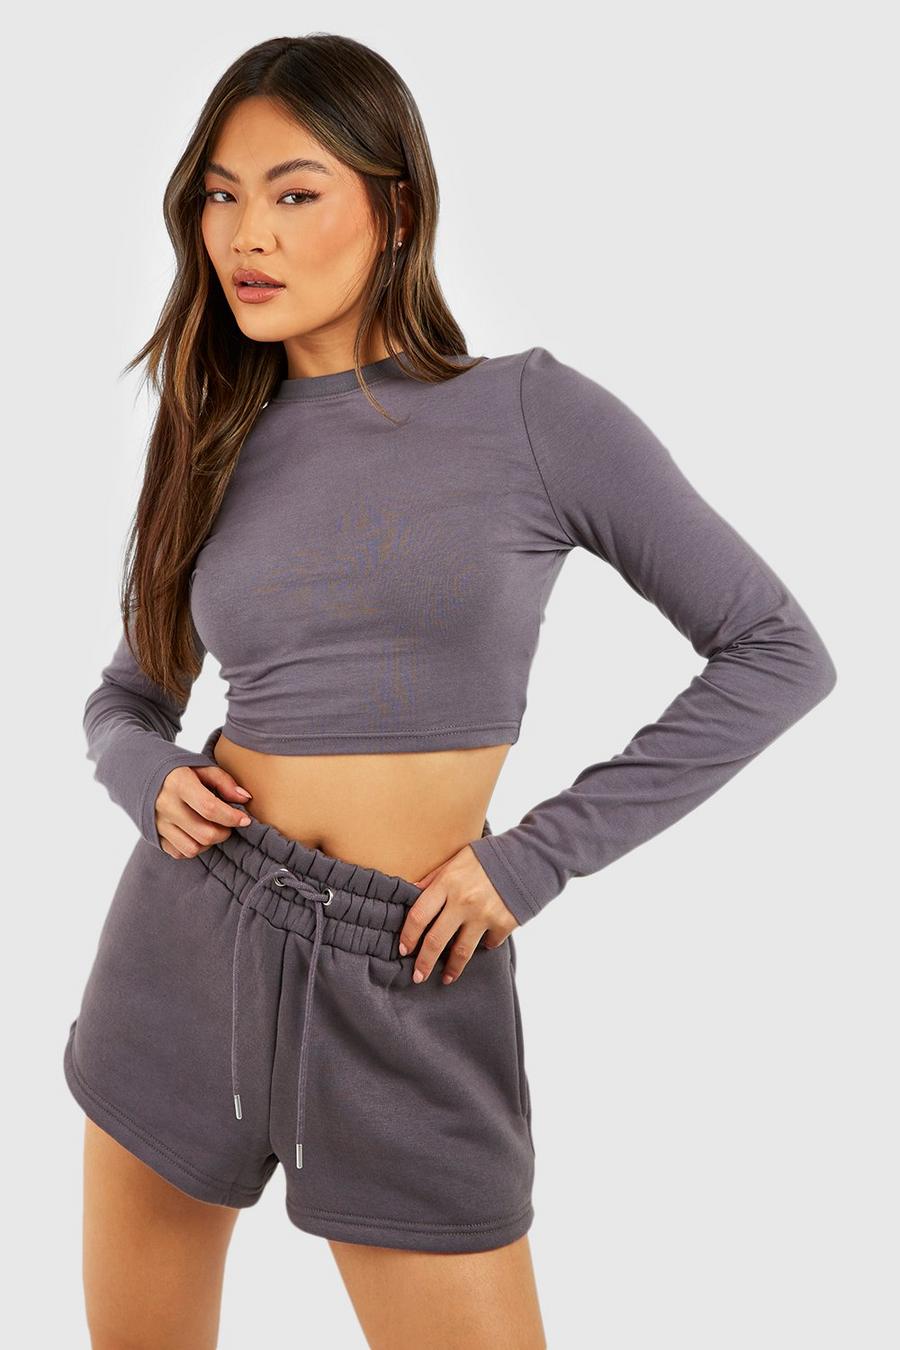 Charcoal Long Sleeve Fitted Top